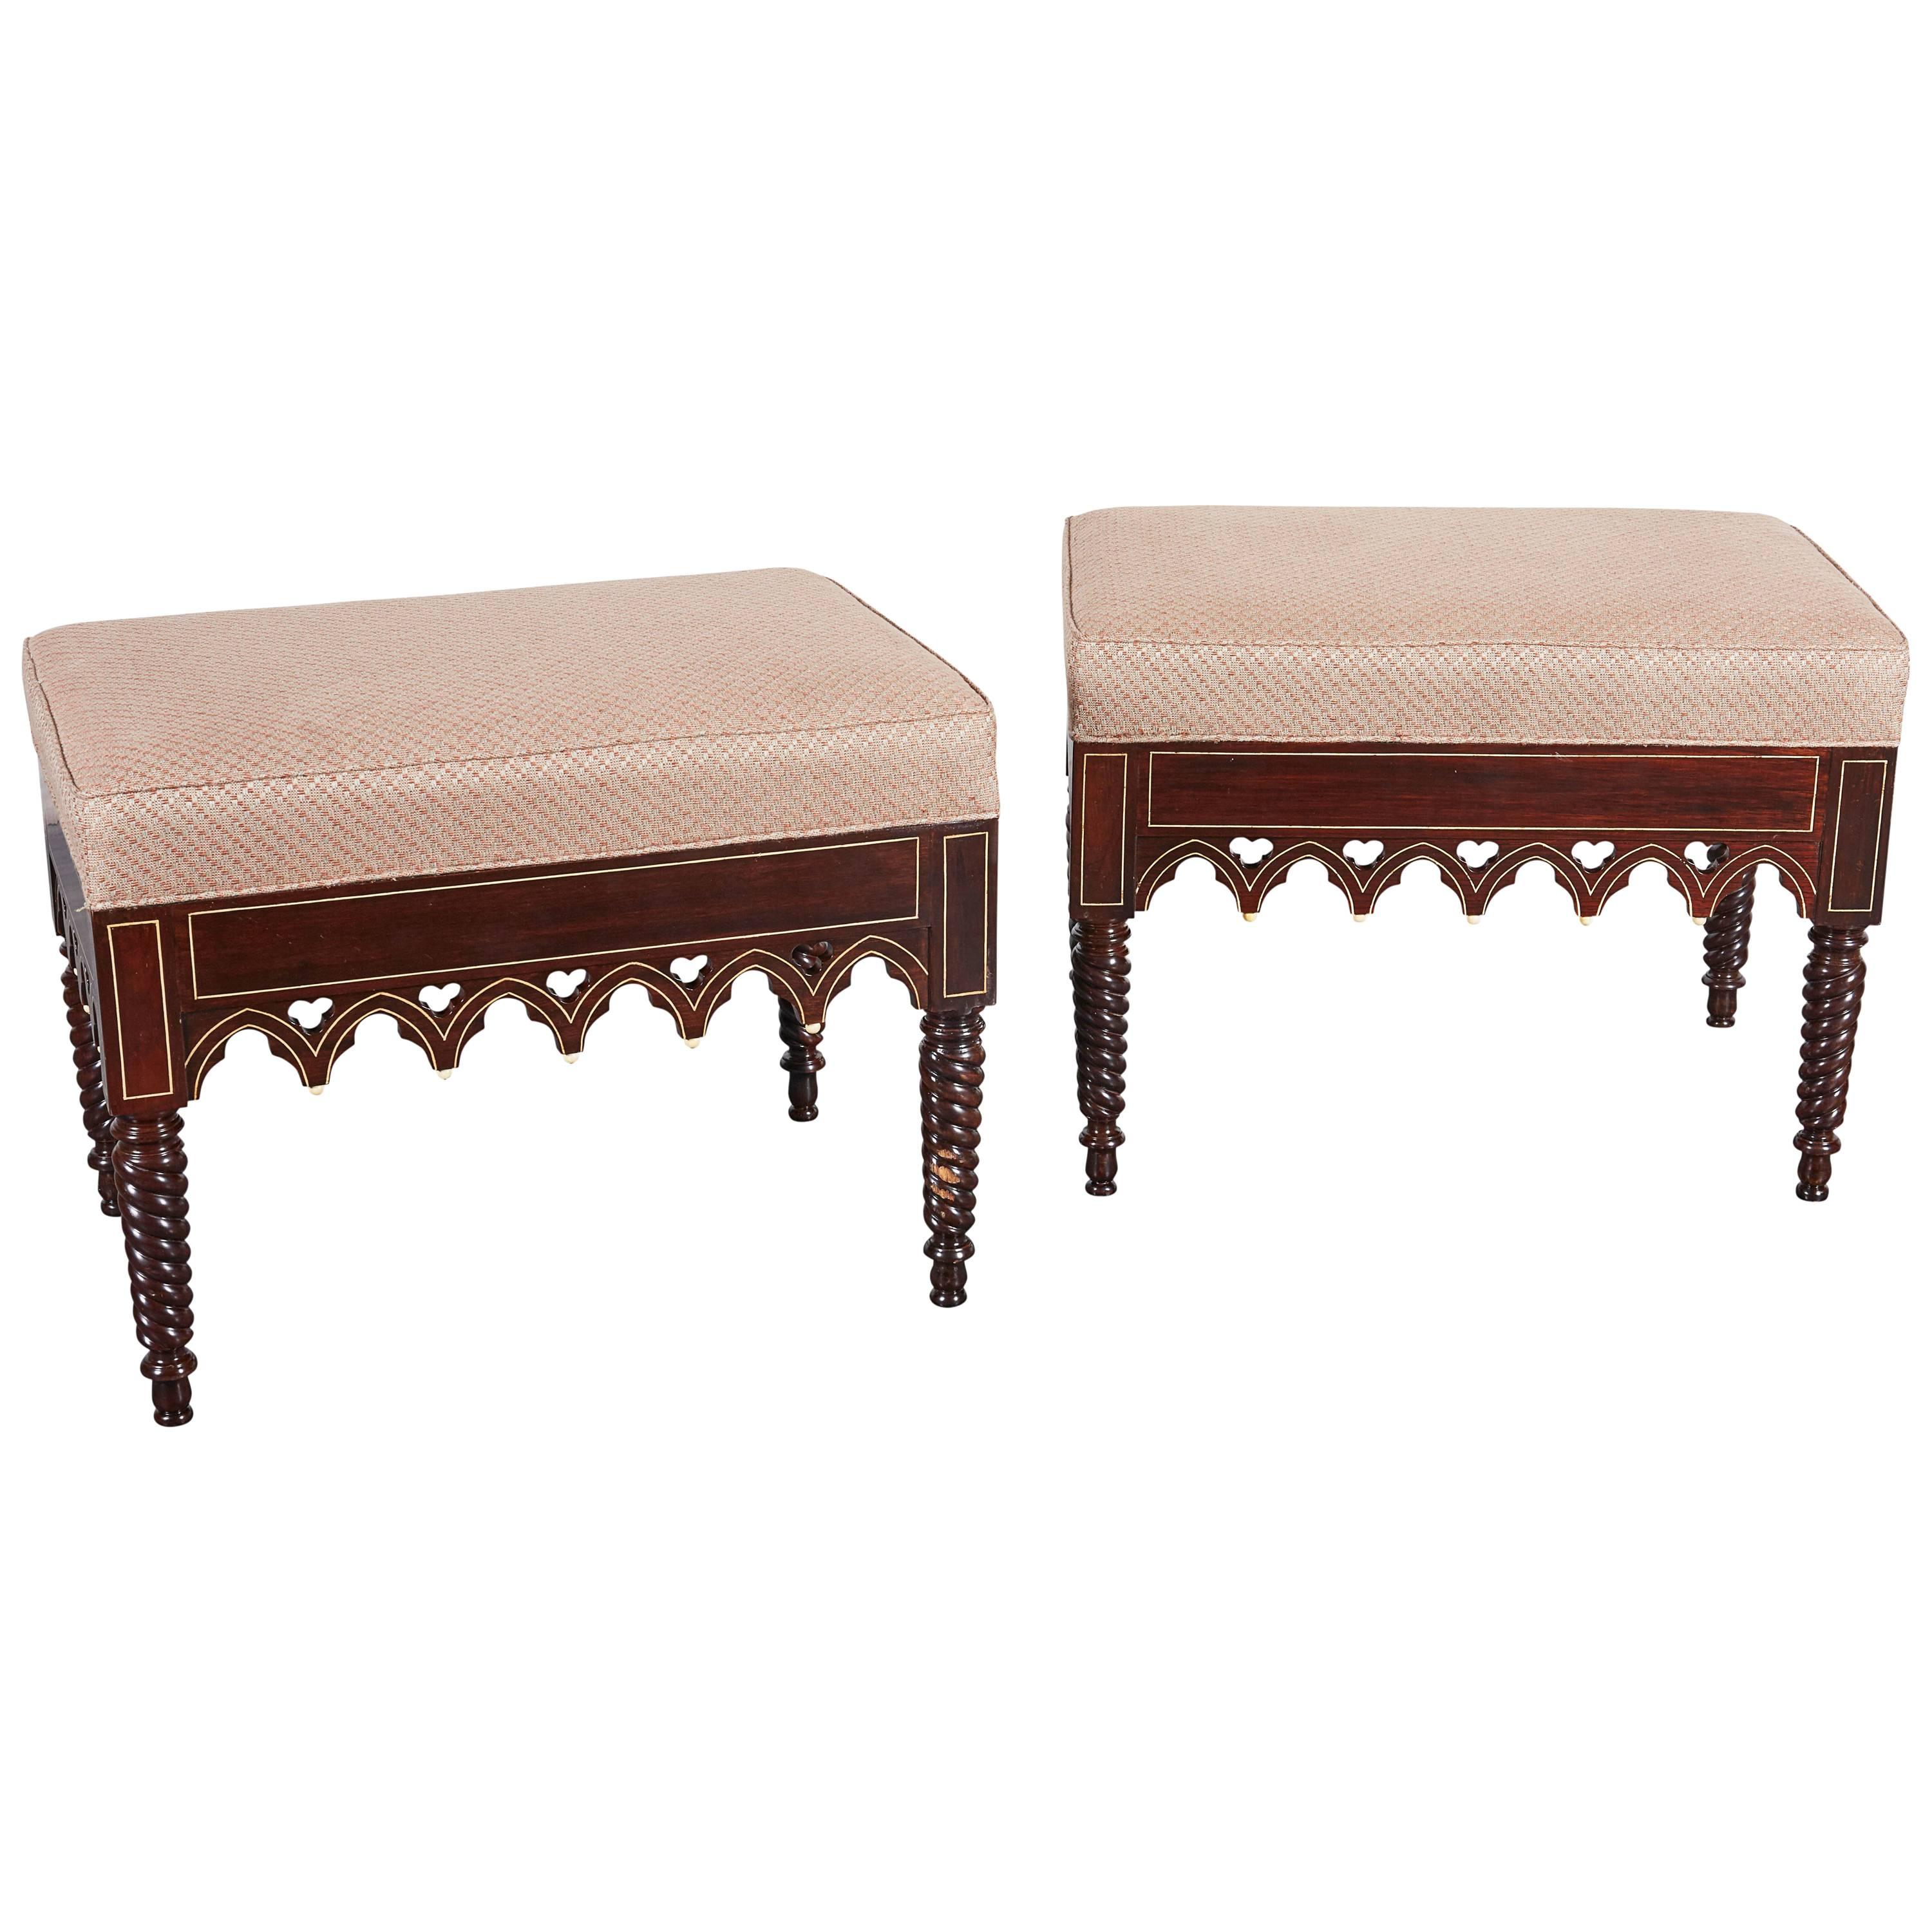 Pair of Charles X Gothic Revival Rosewood Benches